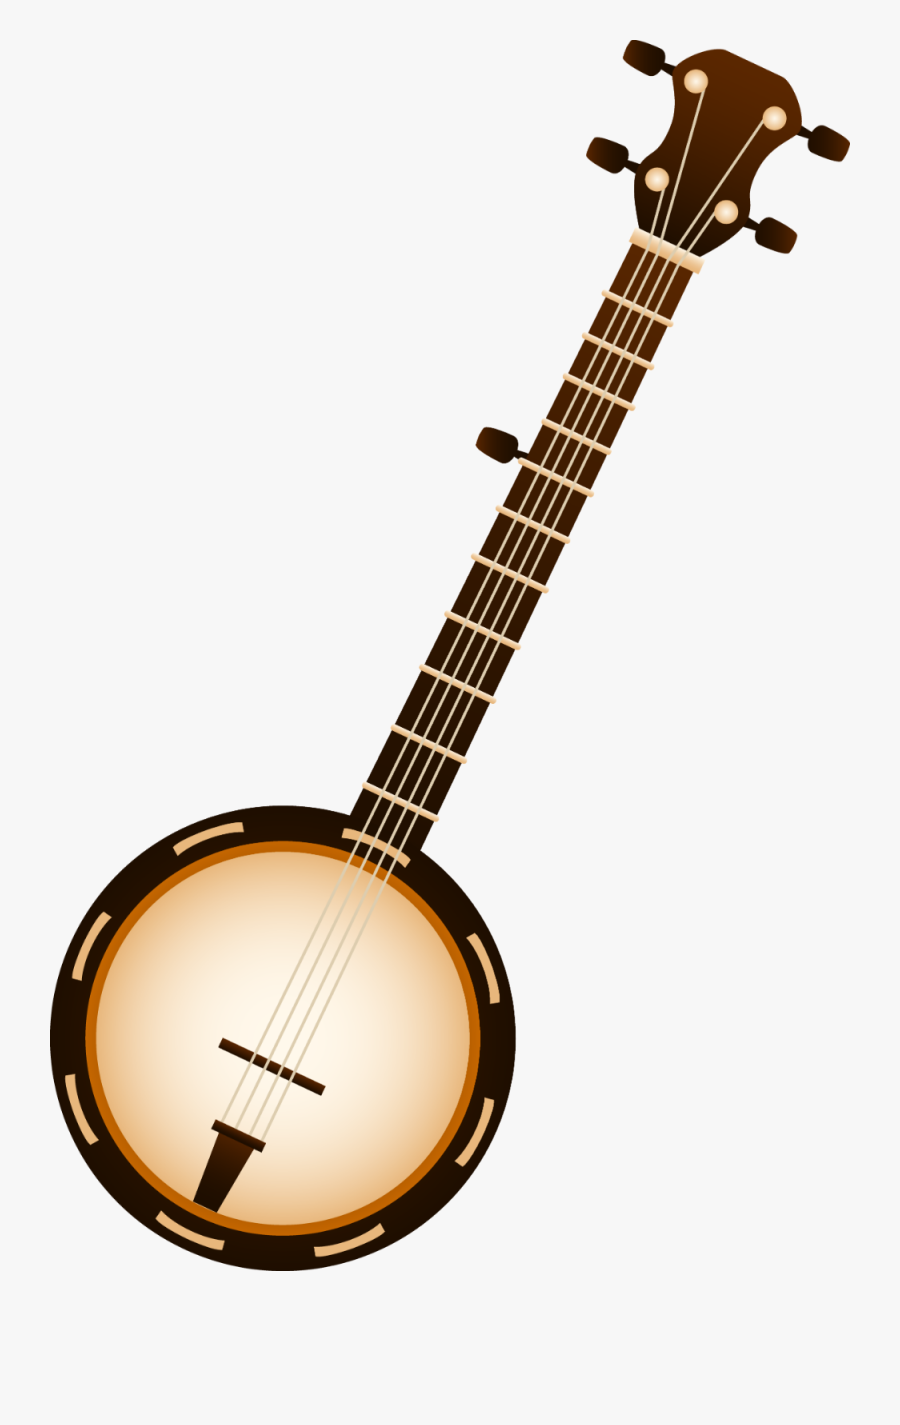 Country Music Clipart Free - Banjo Clipart, Transparent Clipart